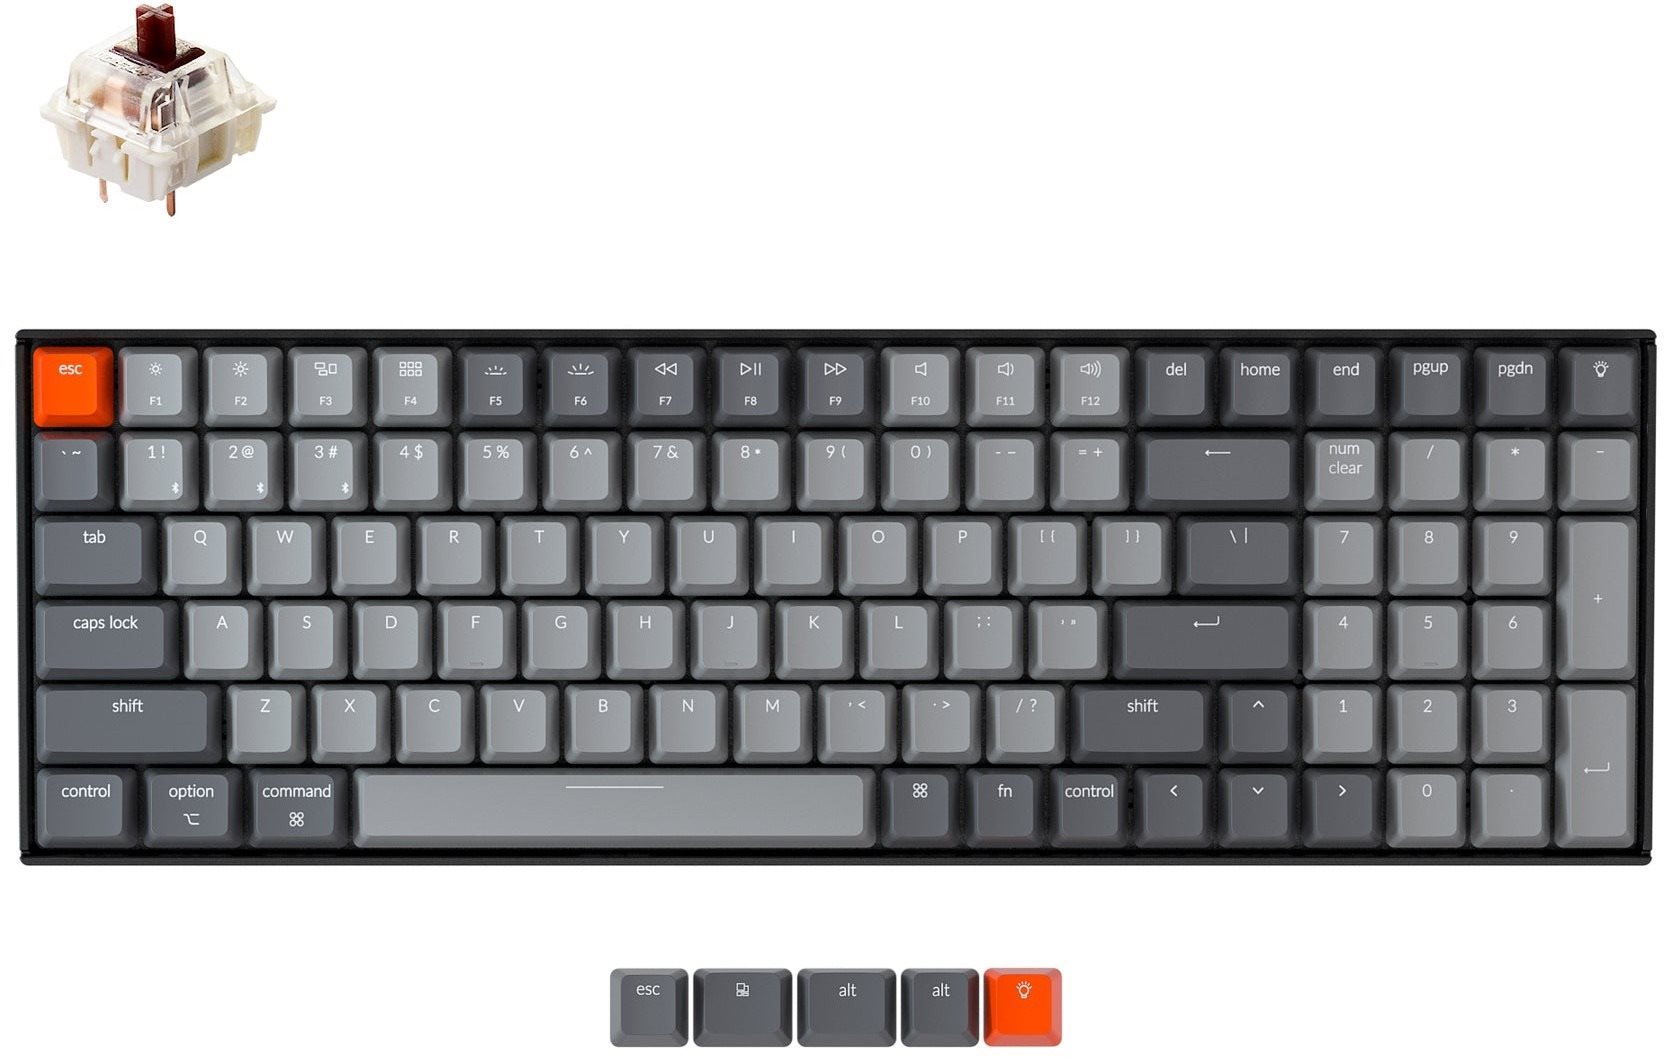 Keychron K4 Gateron Hot-Swappable Brown Switch - US